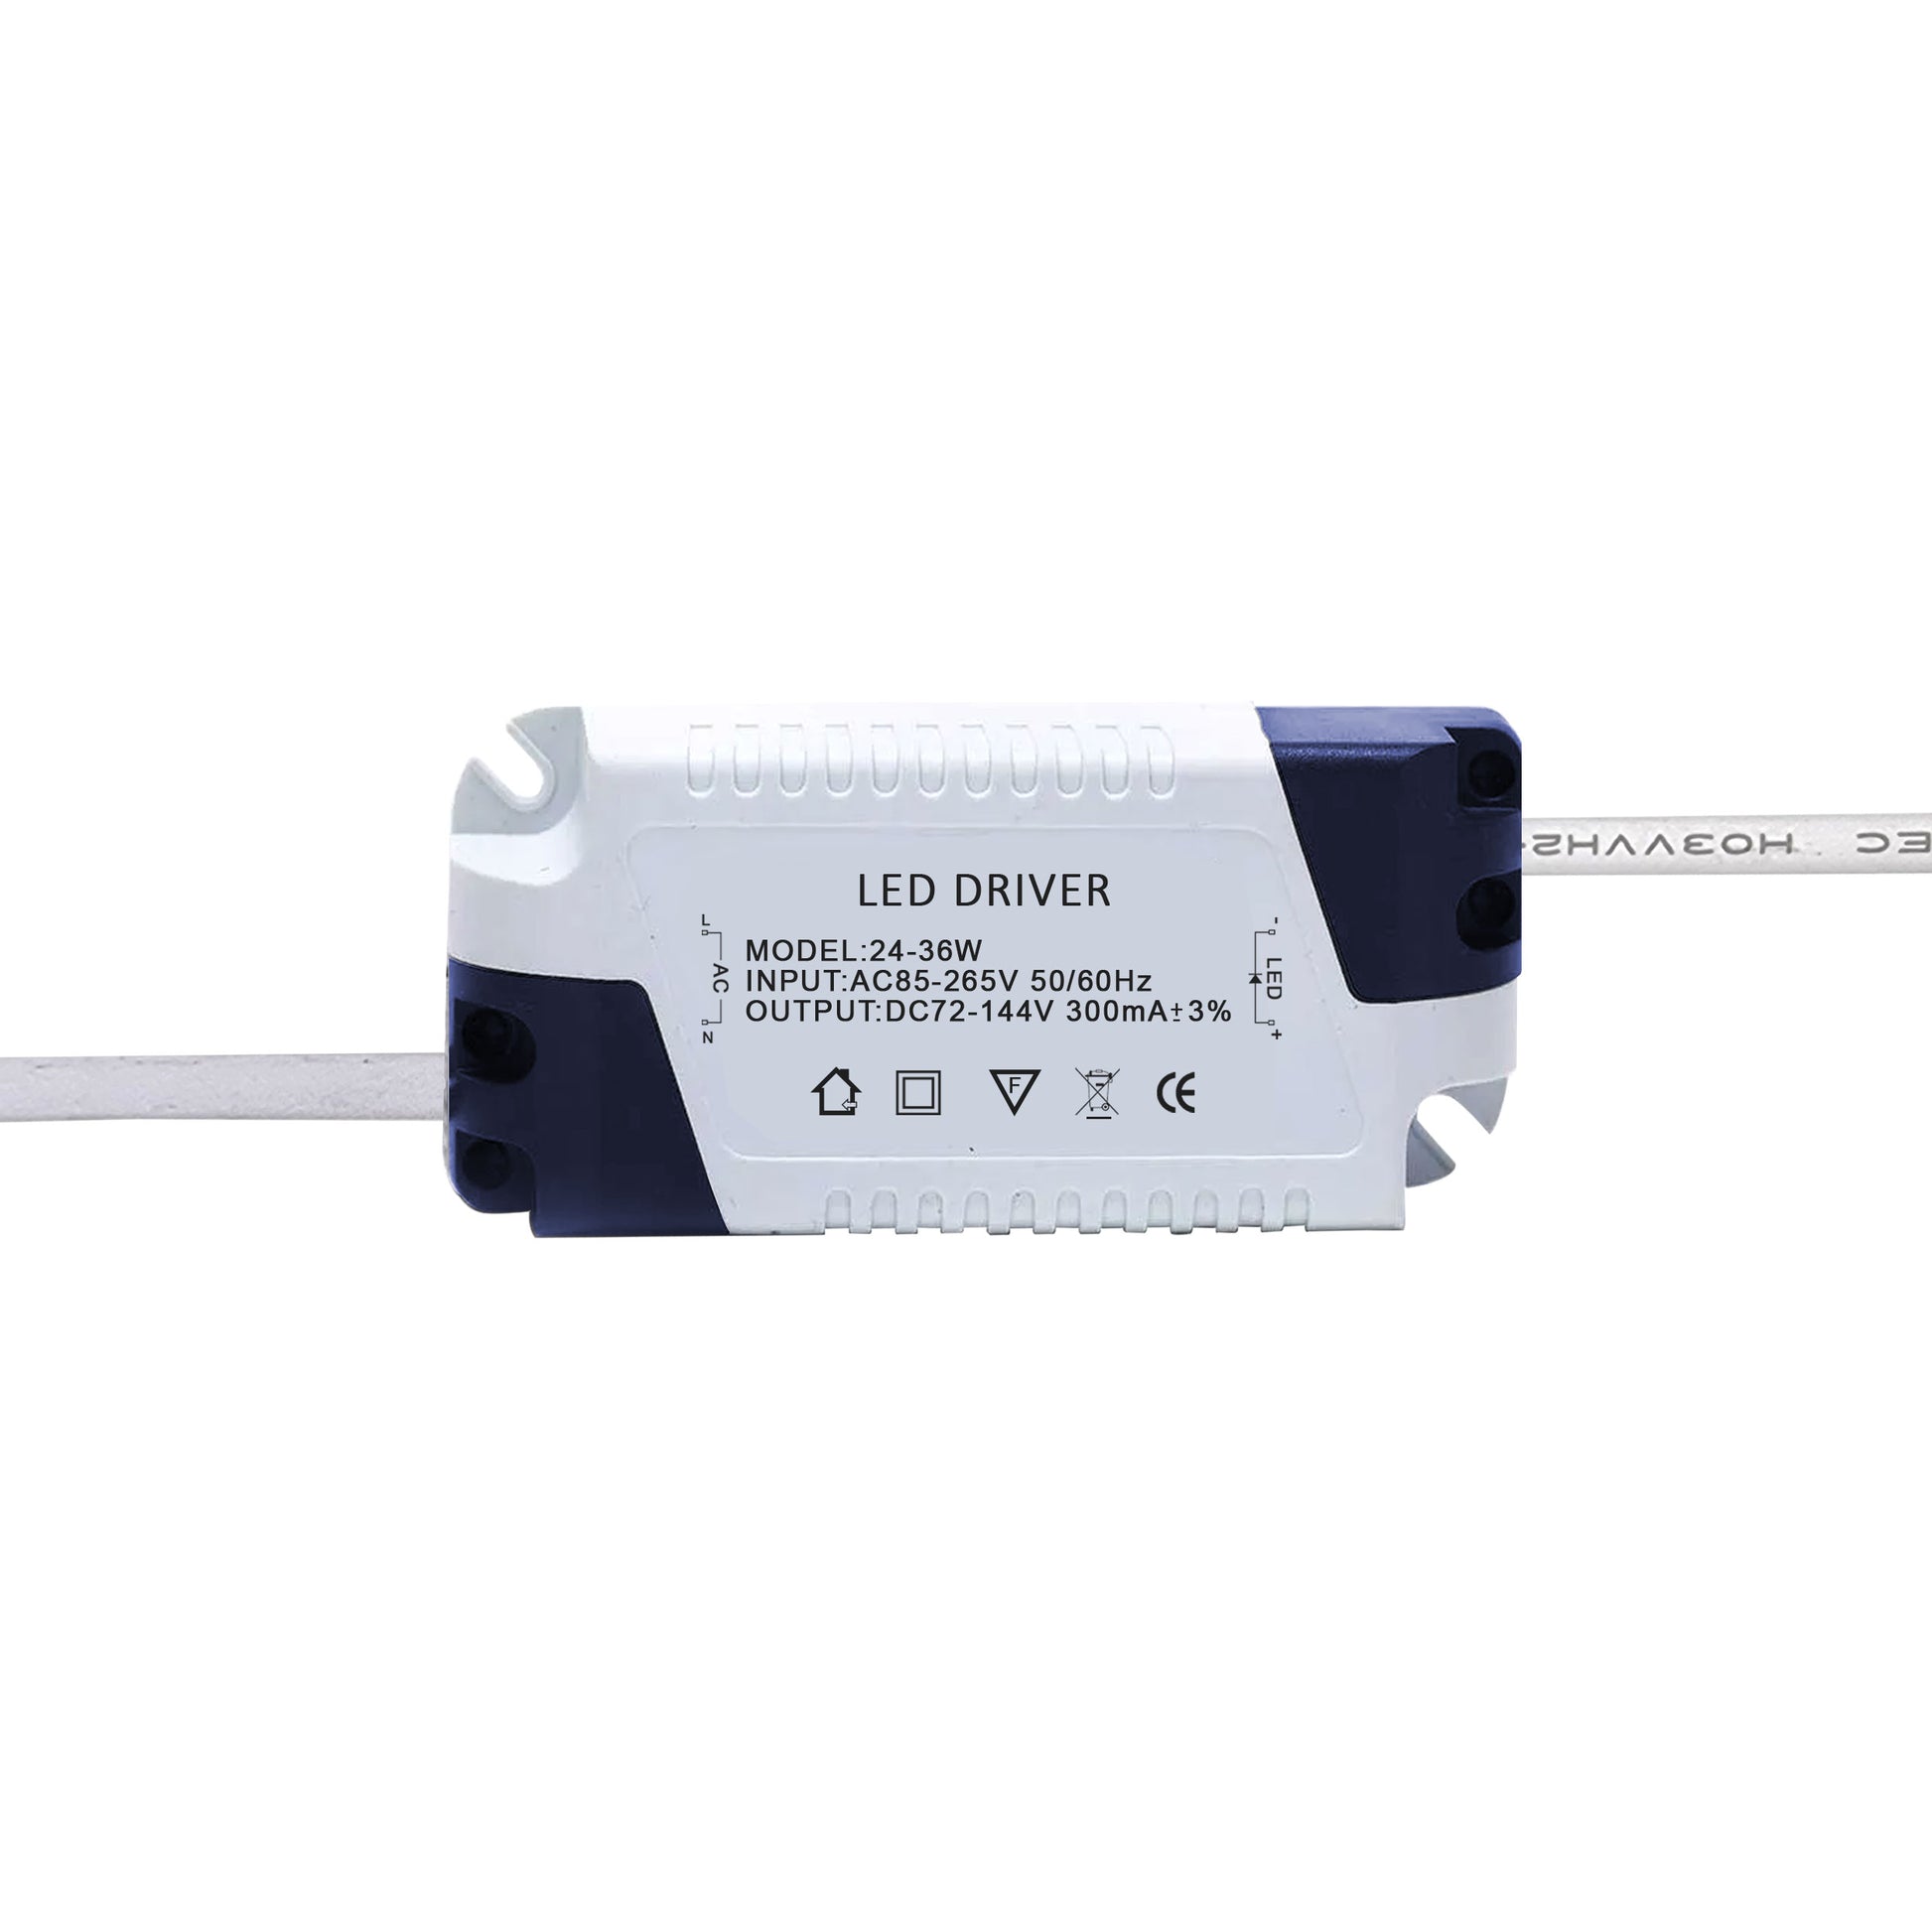 DC24-42V,600mA+/-5% 24w 600mA 4KV Star Bright LED Driver, For Electronic  Instruments, Model Name/Number: Sb at Rs 85/piece in Malegaon